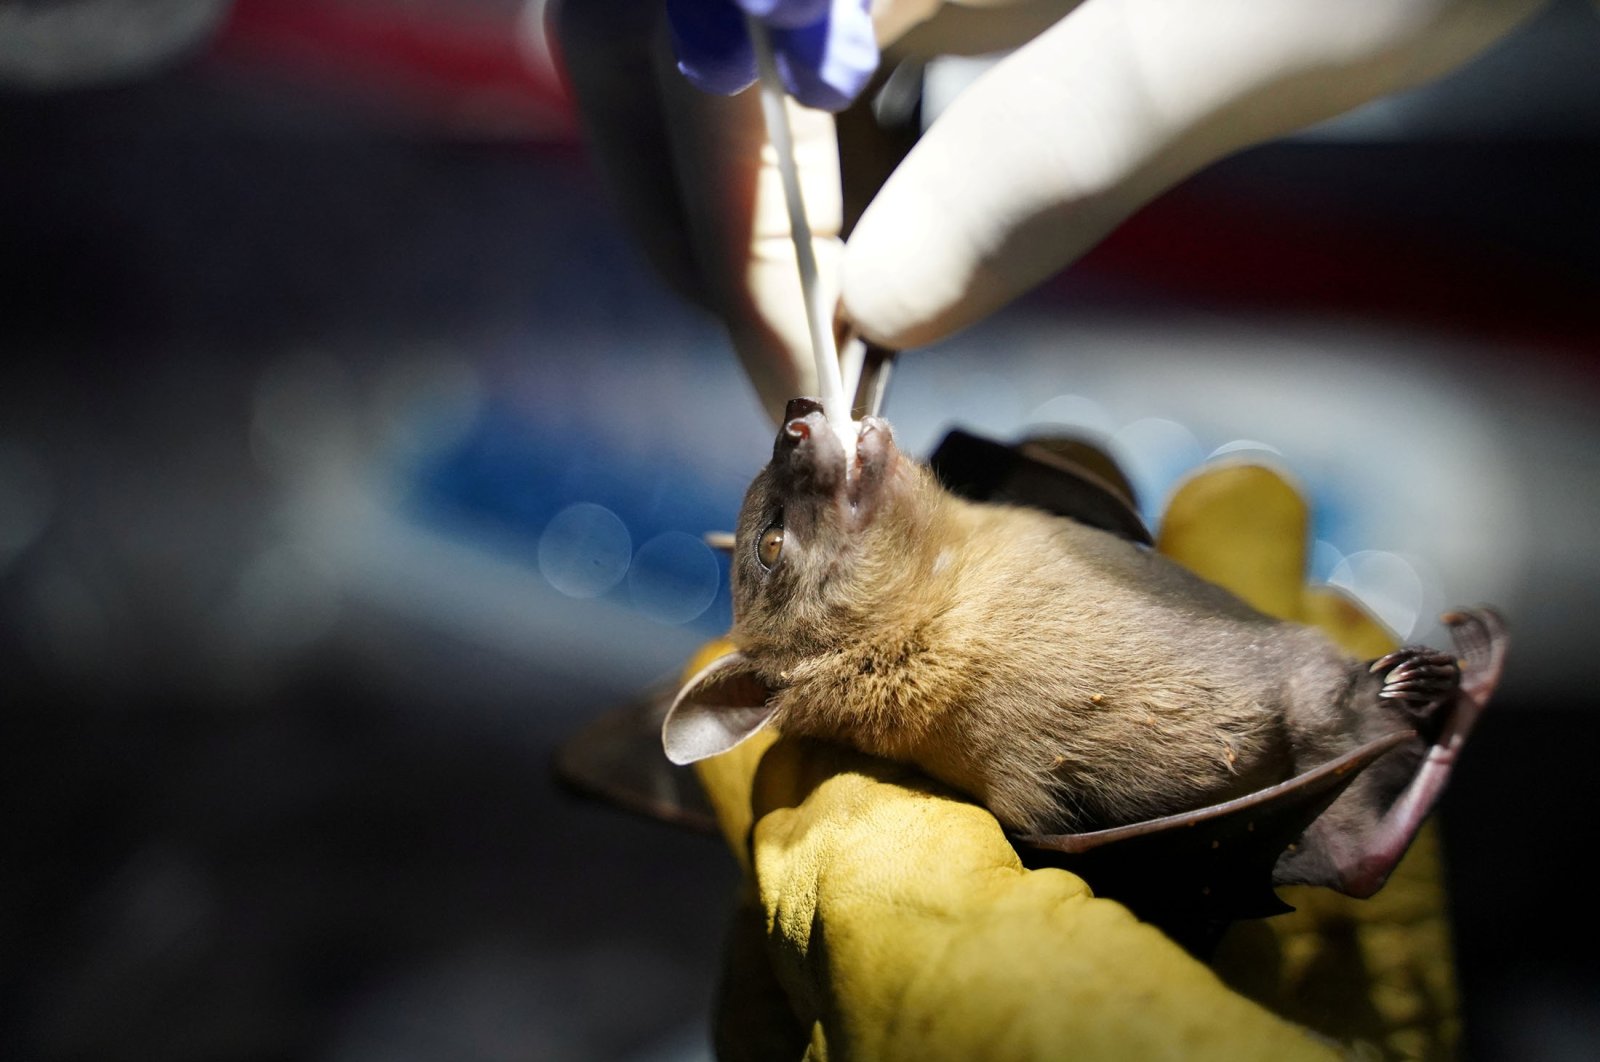 A researcher from the Institut Pasteur du Cambodge takes an oral swab from a bat that was captured at Chhngauk Hill in Thala Borivat District, Steung Treng Province, Cambodia, Aug. 30, 2021. (Reuters Photo)